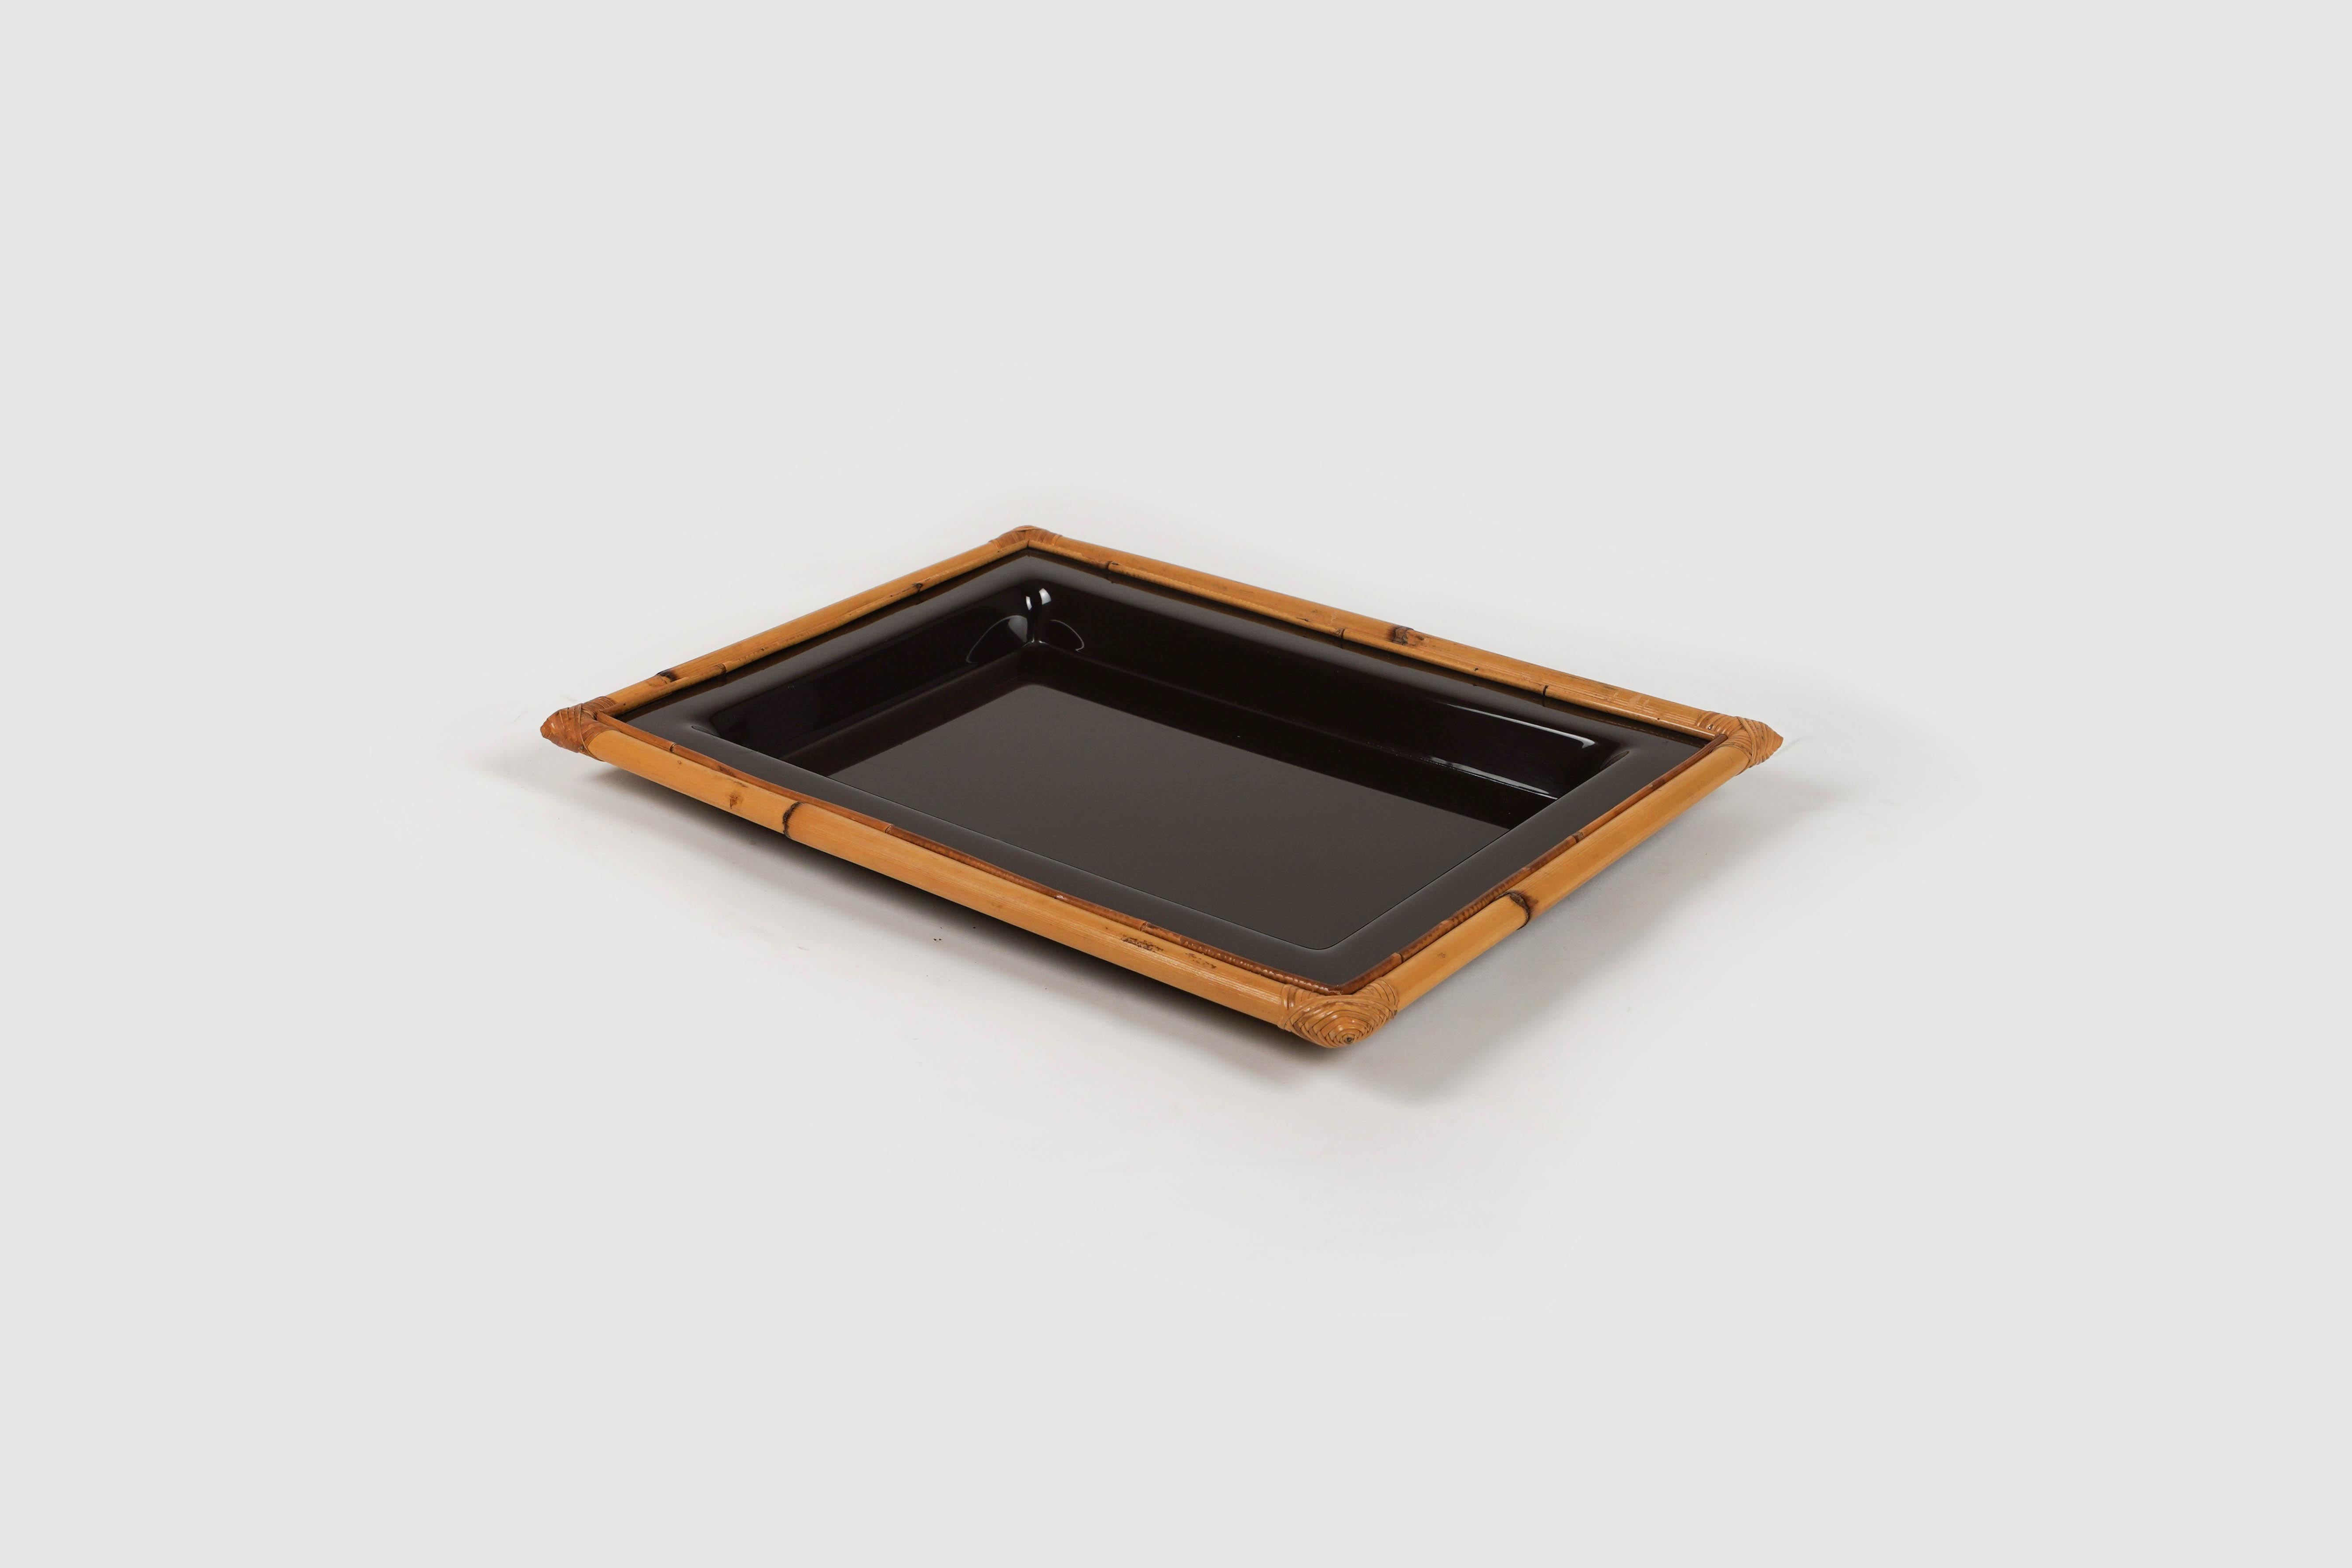 Bamboo Midcentury Rectangular Serving Tray in bamboo, Rattan and Acrylic, Italy 1970s